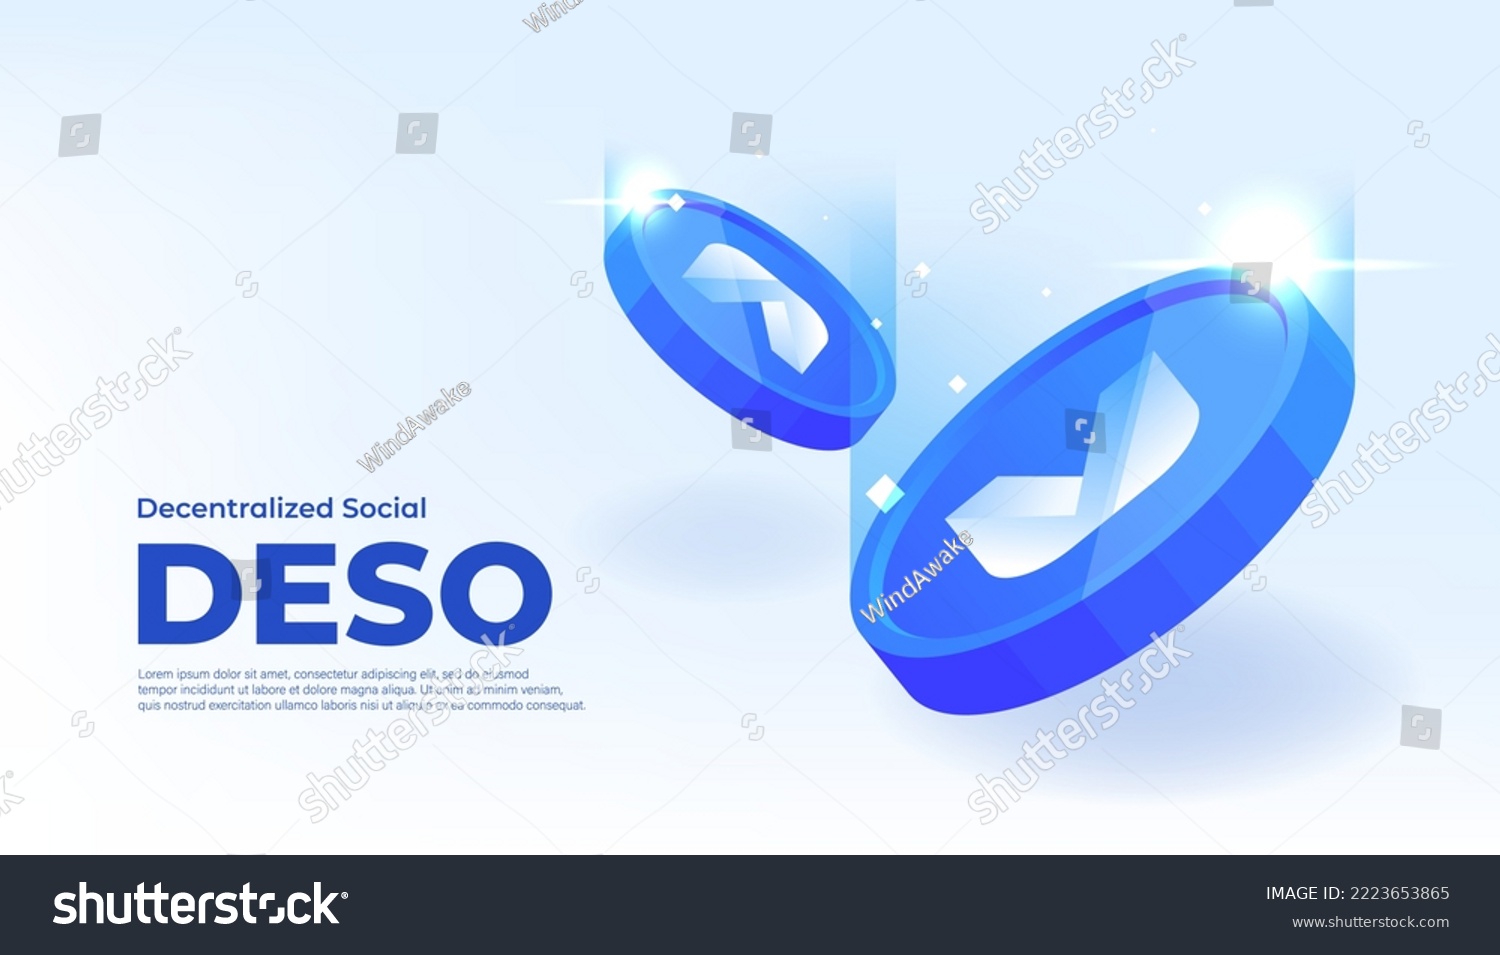 SVG of Decentralized Social (DESO) coin cryptocurrency concept banner background. svg